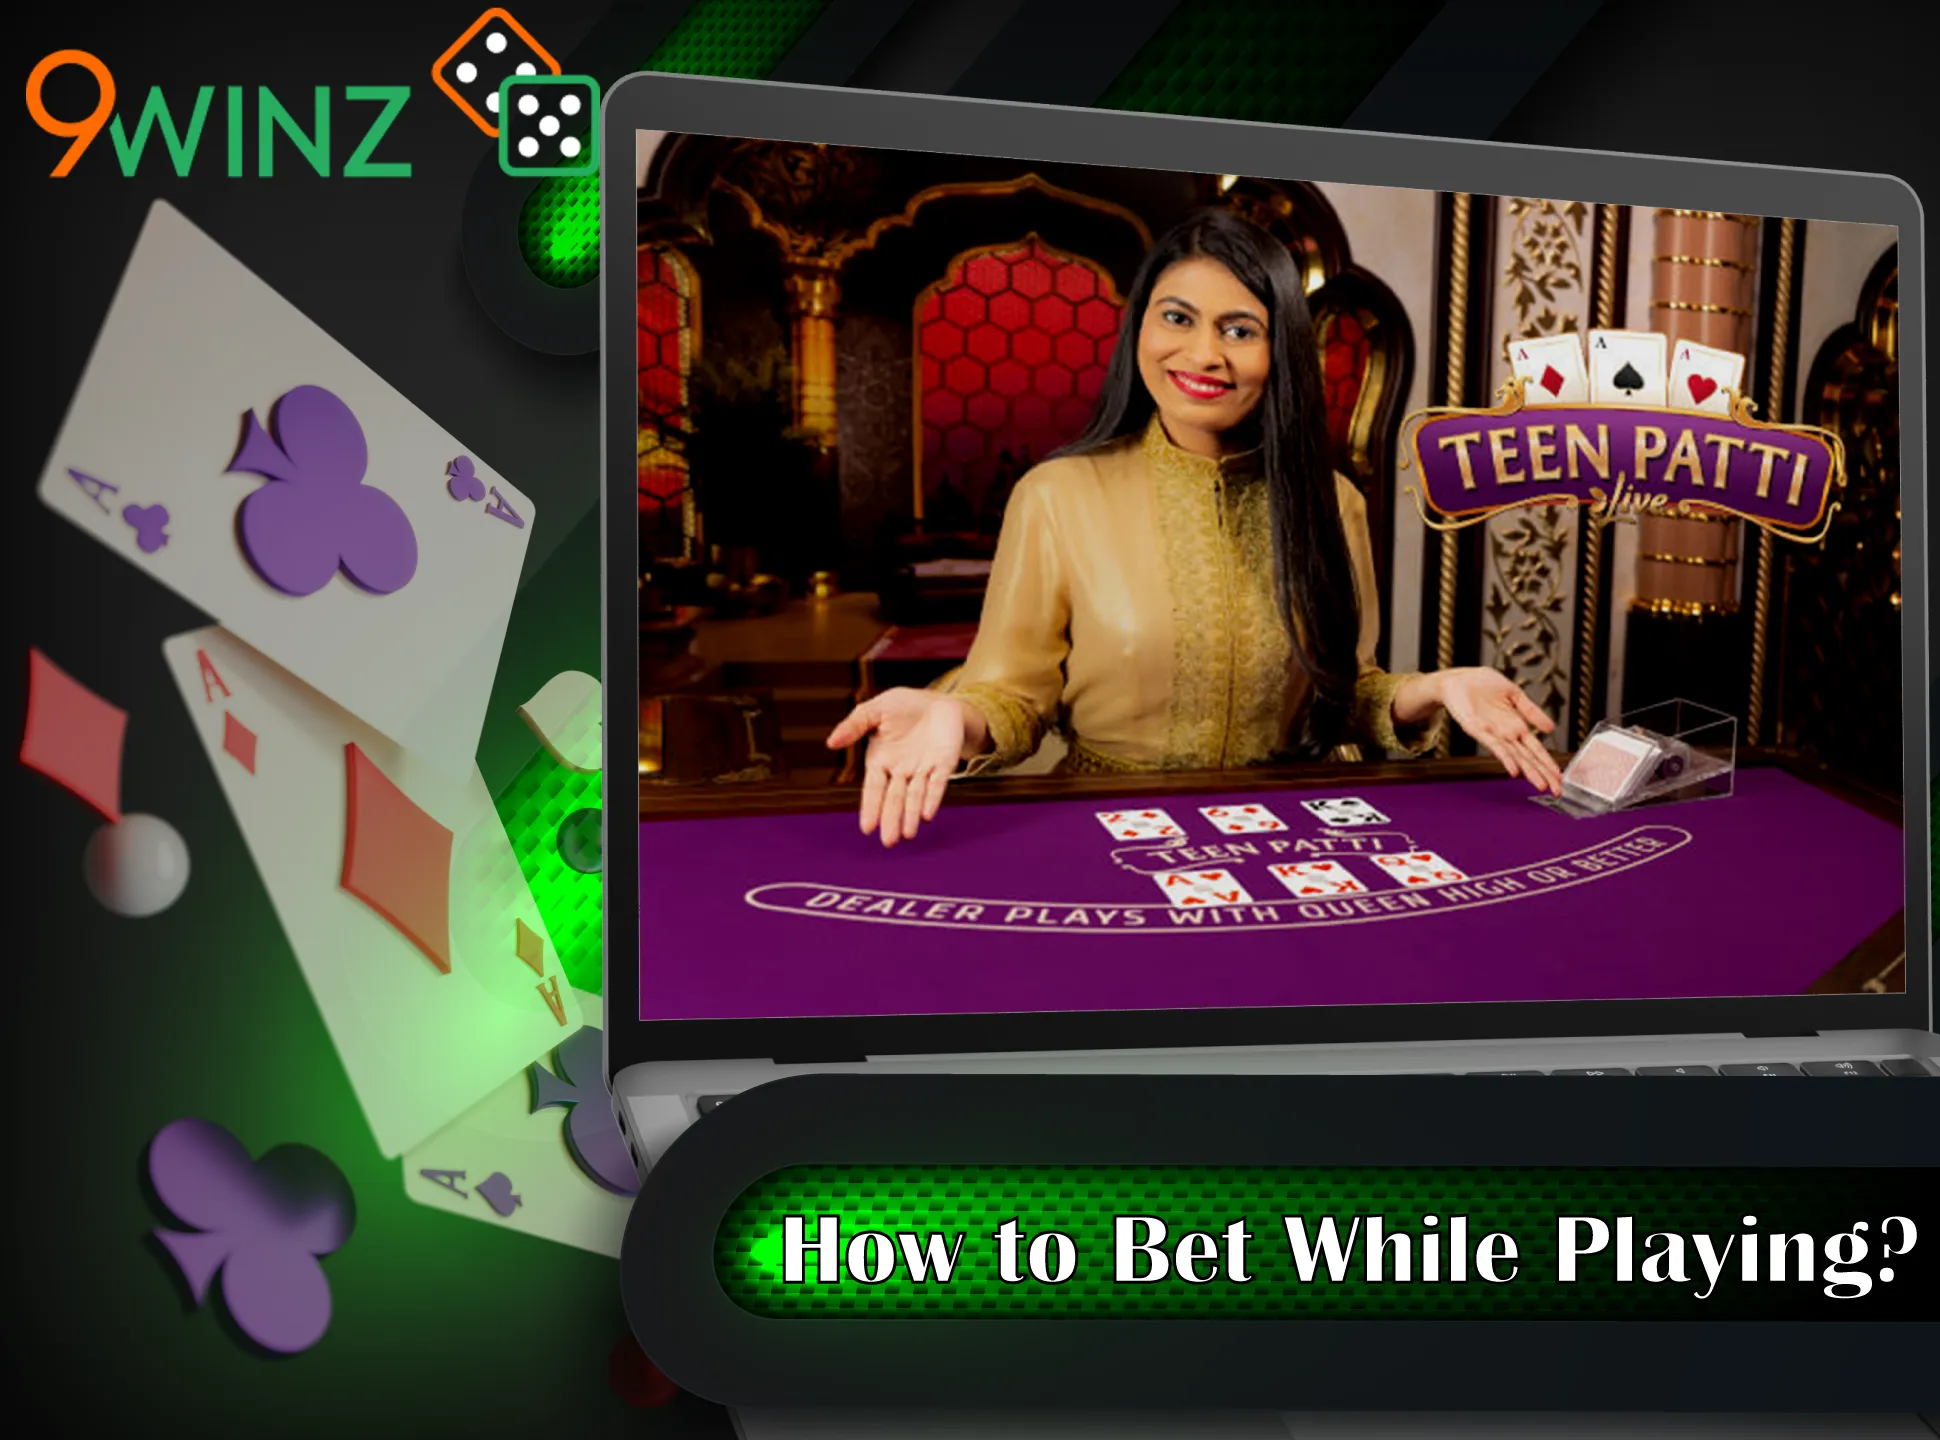 There are certain rules of betting in Teen Patti.